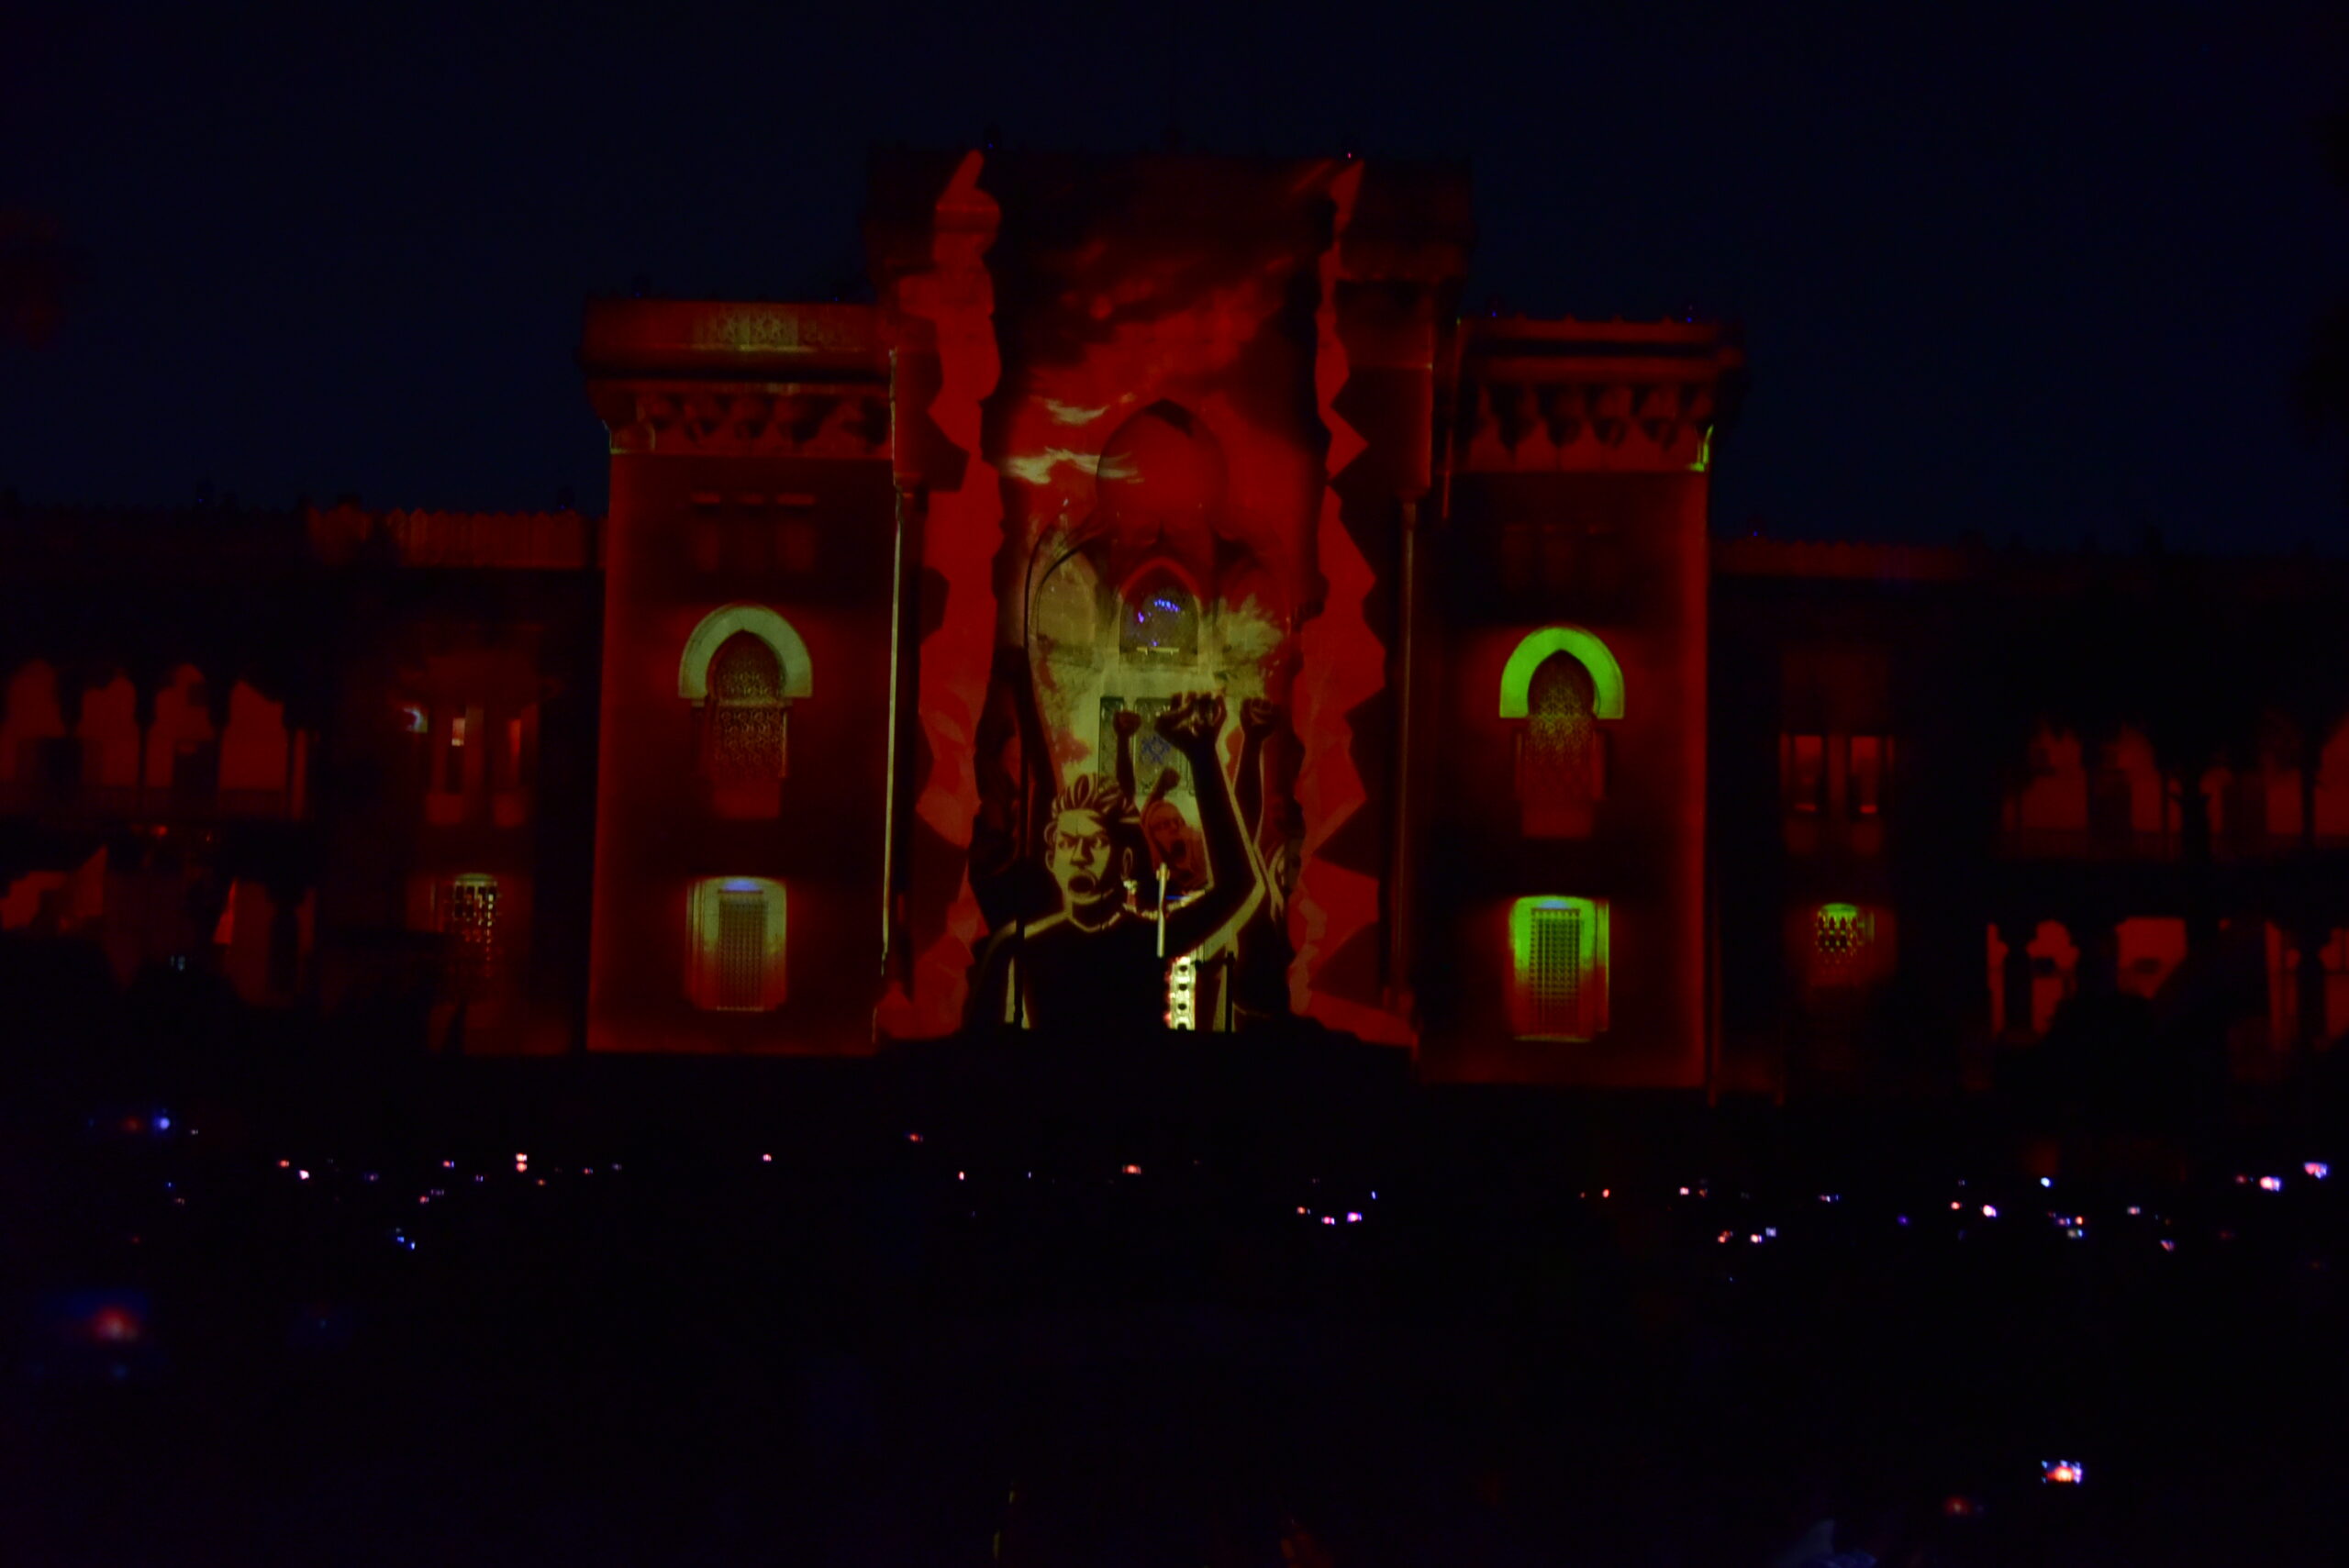 Dynamic Laser Show At Arts College In Osmania University (36)